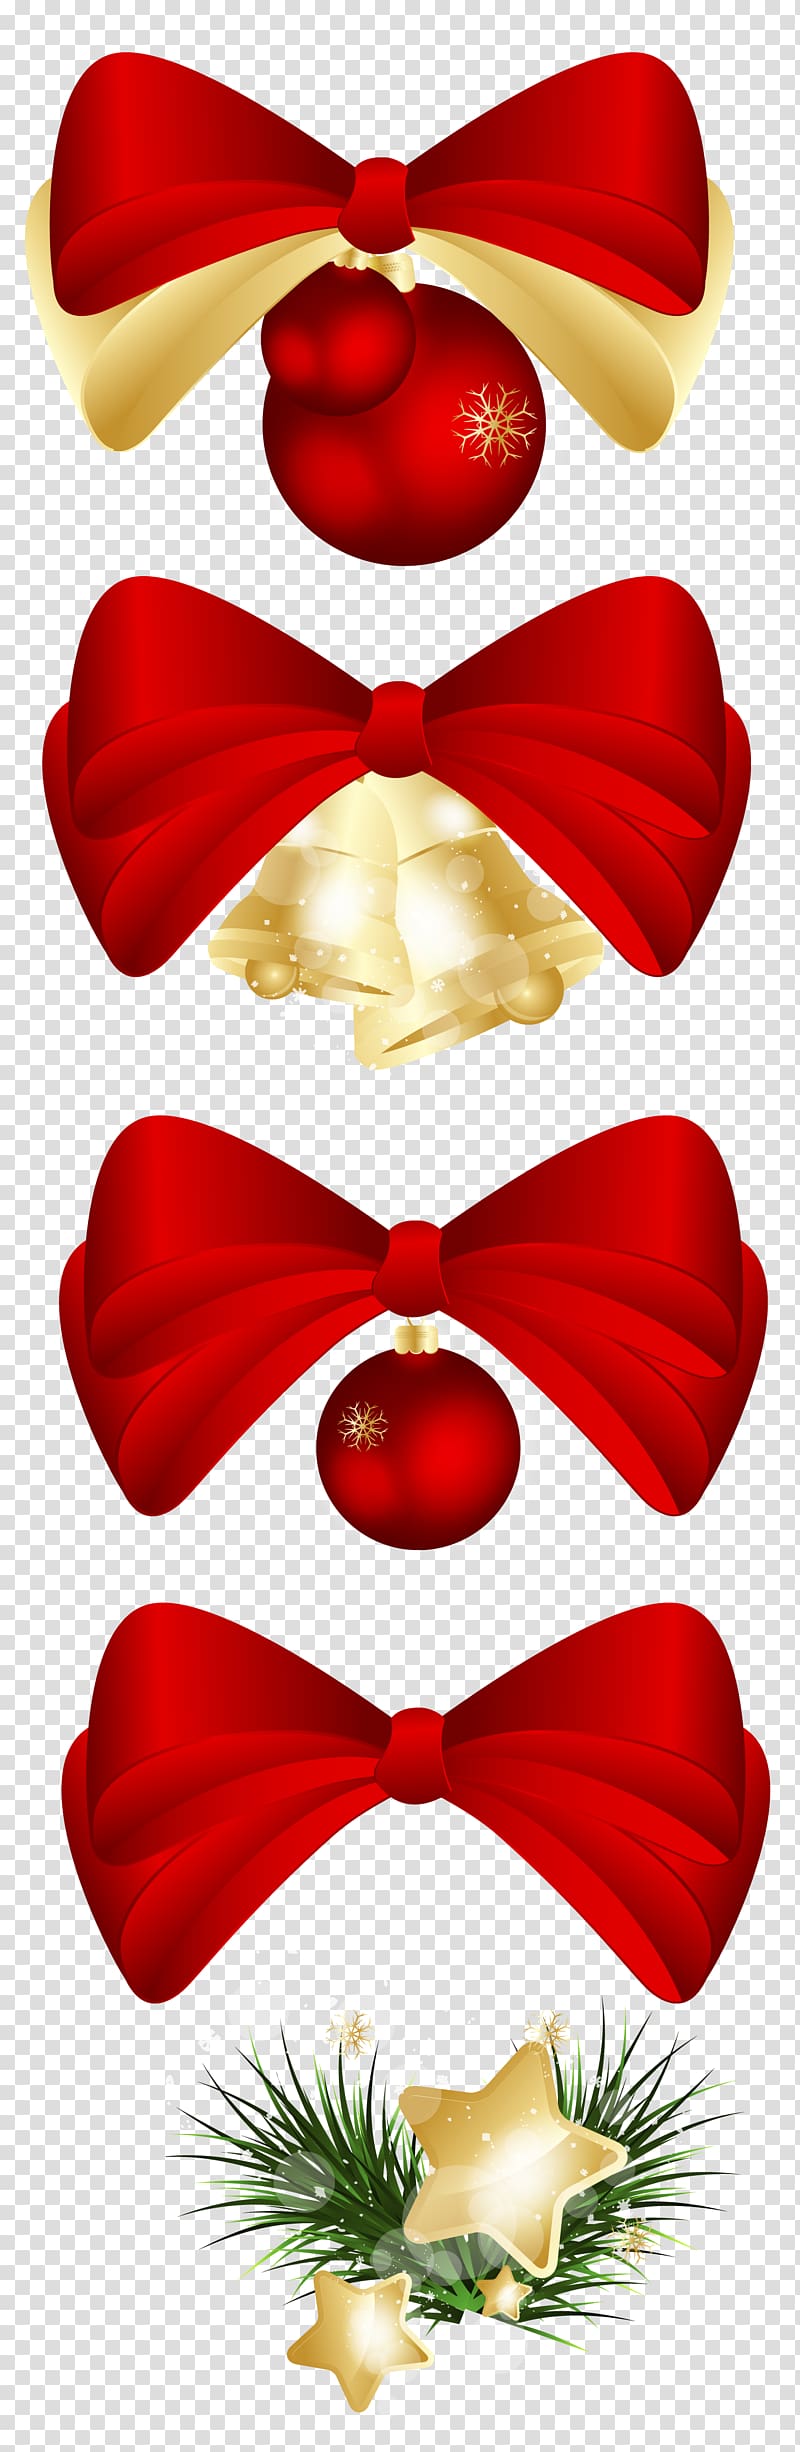 ribbons with baubles illustration, Christmas ornament Christmas decoration , Christmas Ornament Collection transparent background PNG clipart